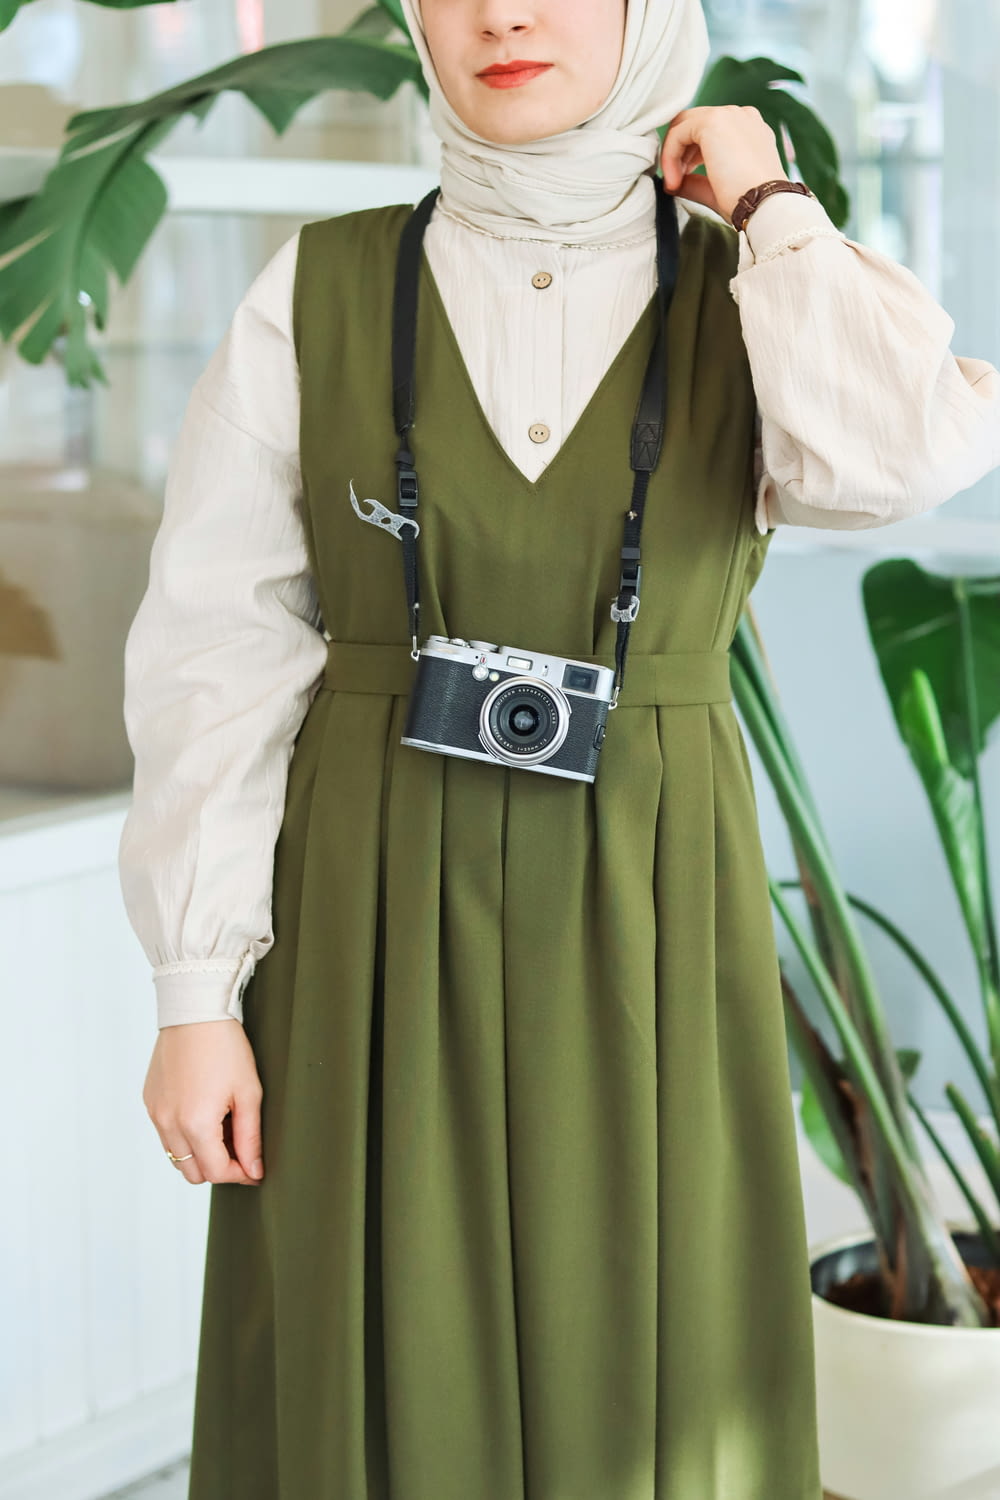 a woman in a green dress with a camera